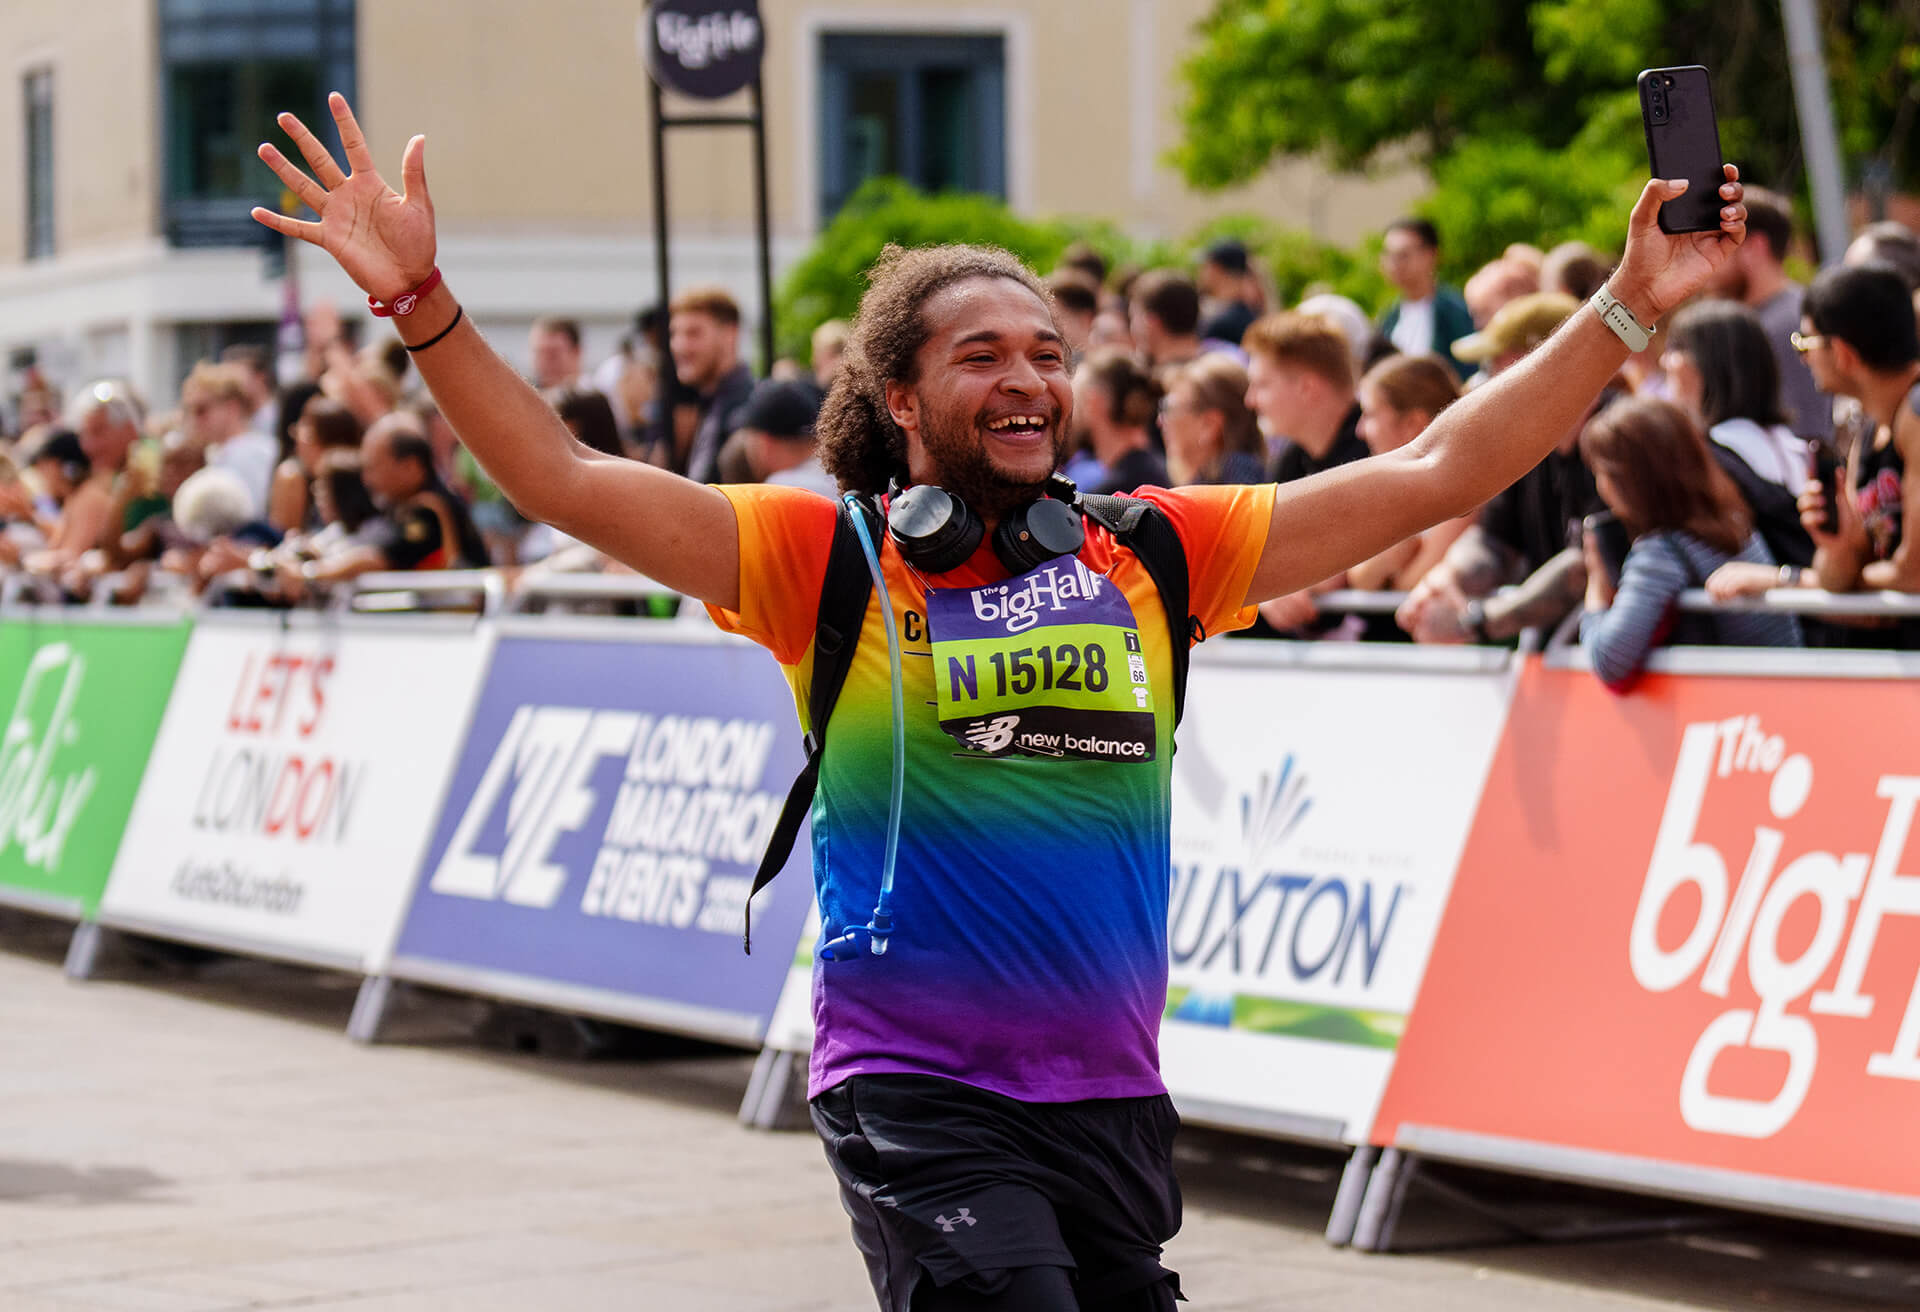 Man smiles with arms up as he runs The Big Half